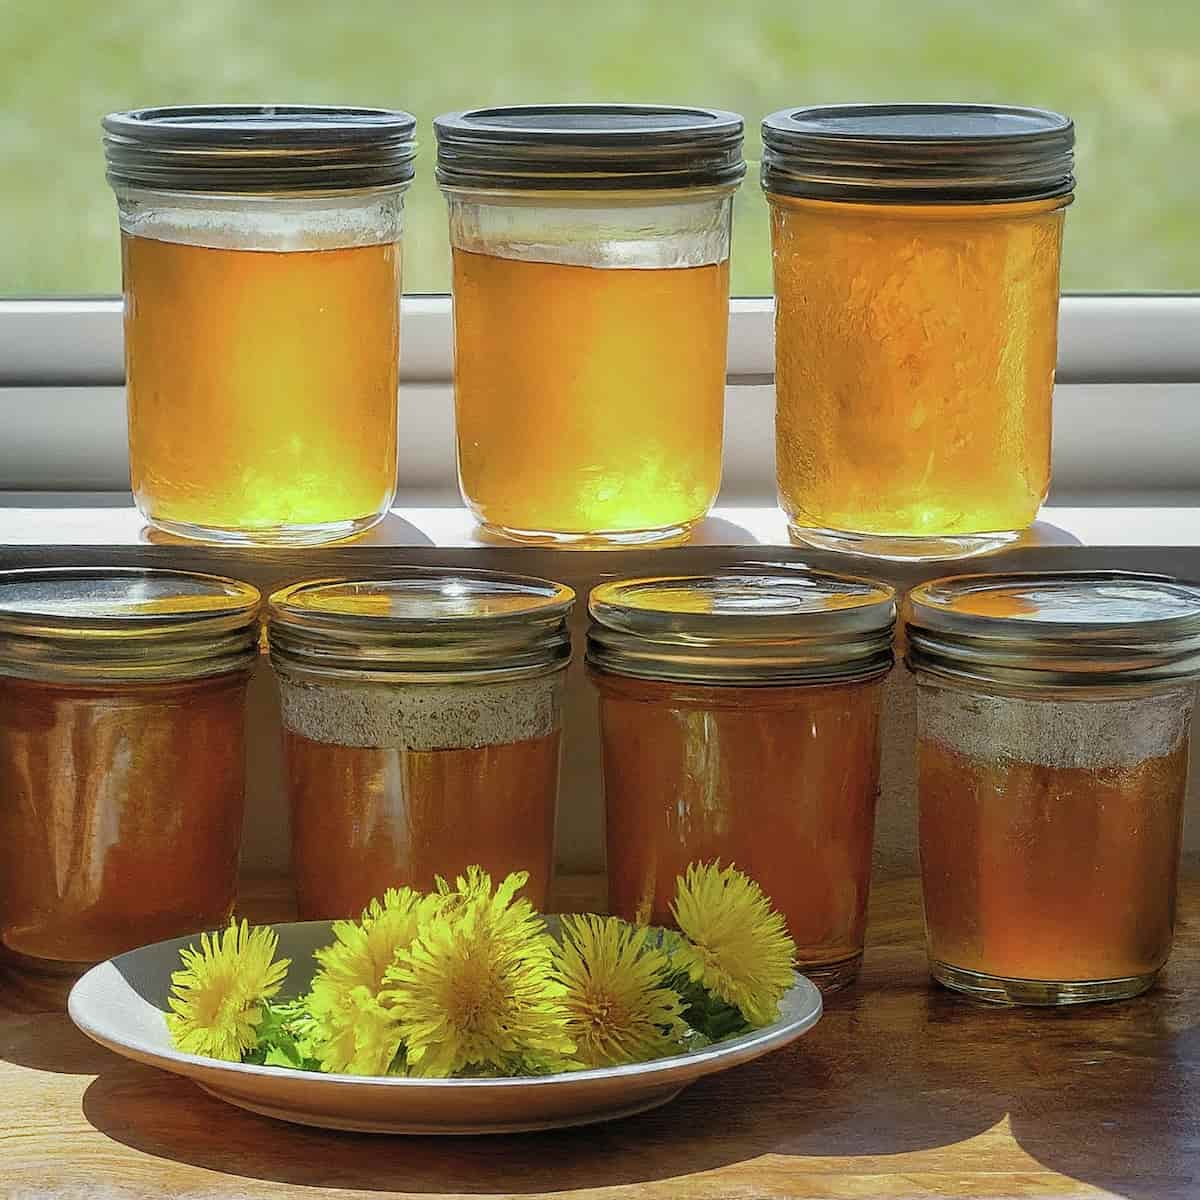 A picture of jars of dandelion jelly